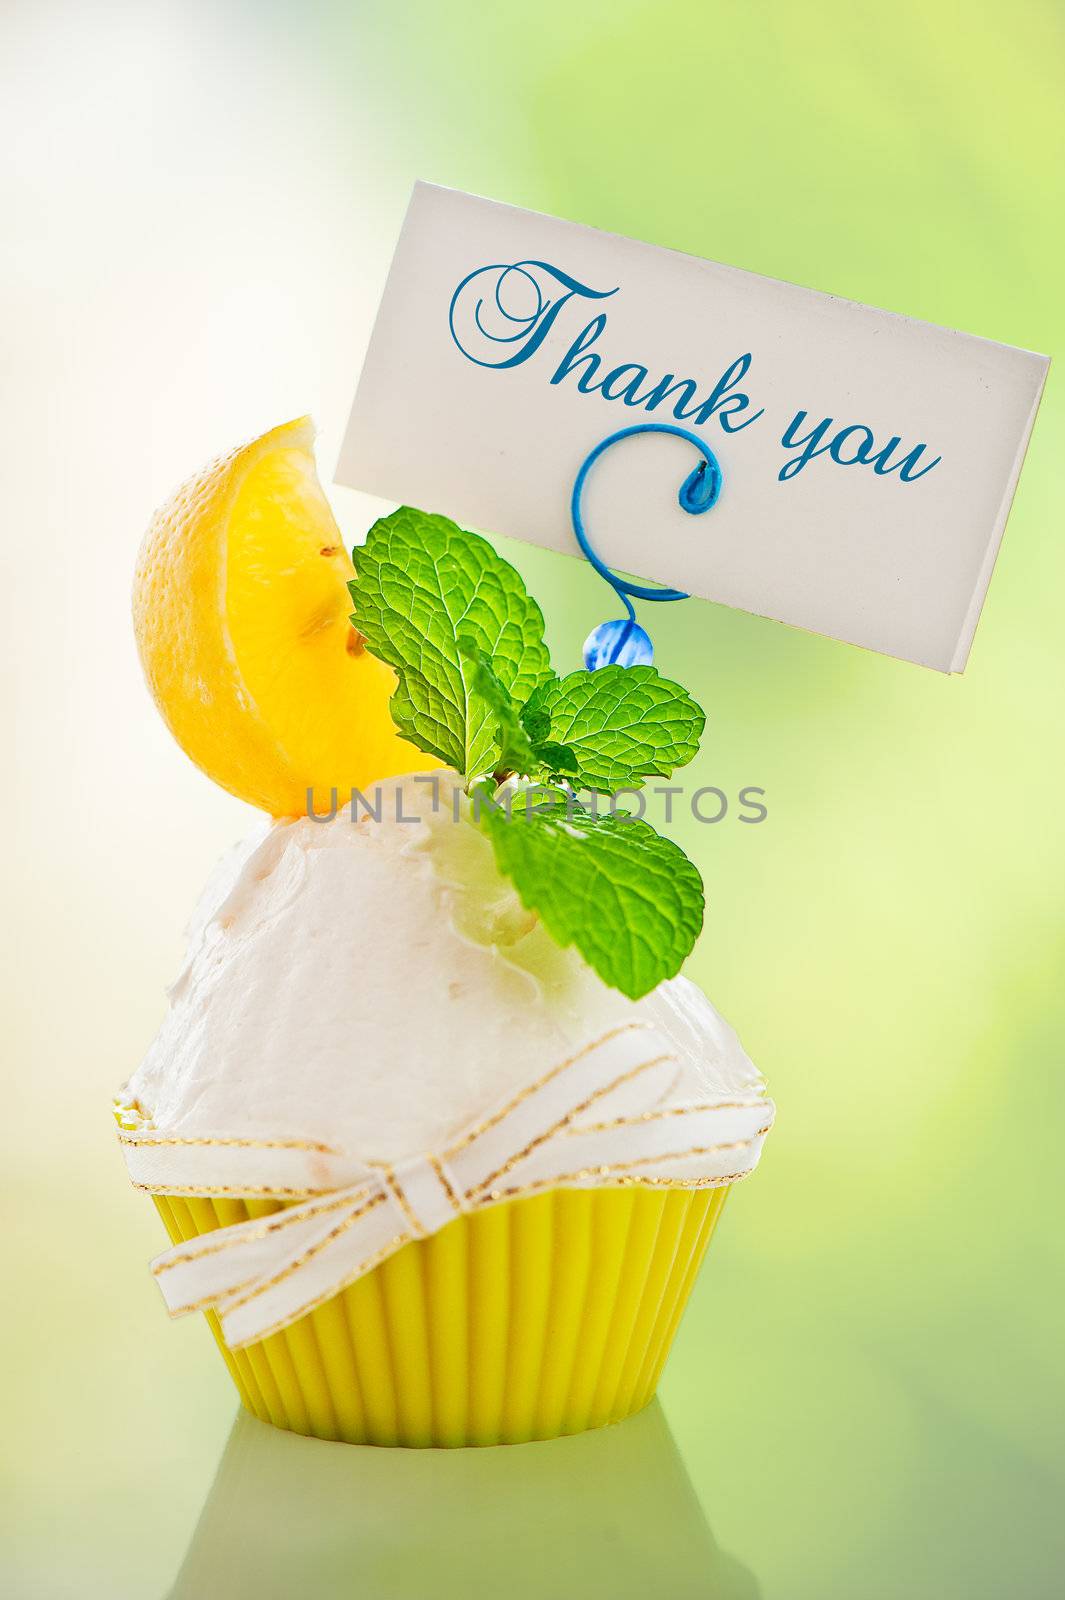 A refreshing lemon cupcake with a leaf of mint and a label for your text on green background as a studio shot